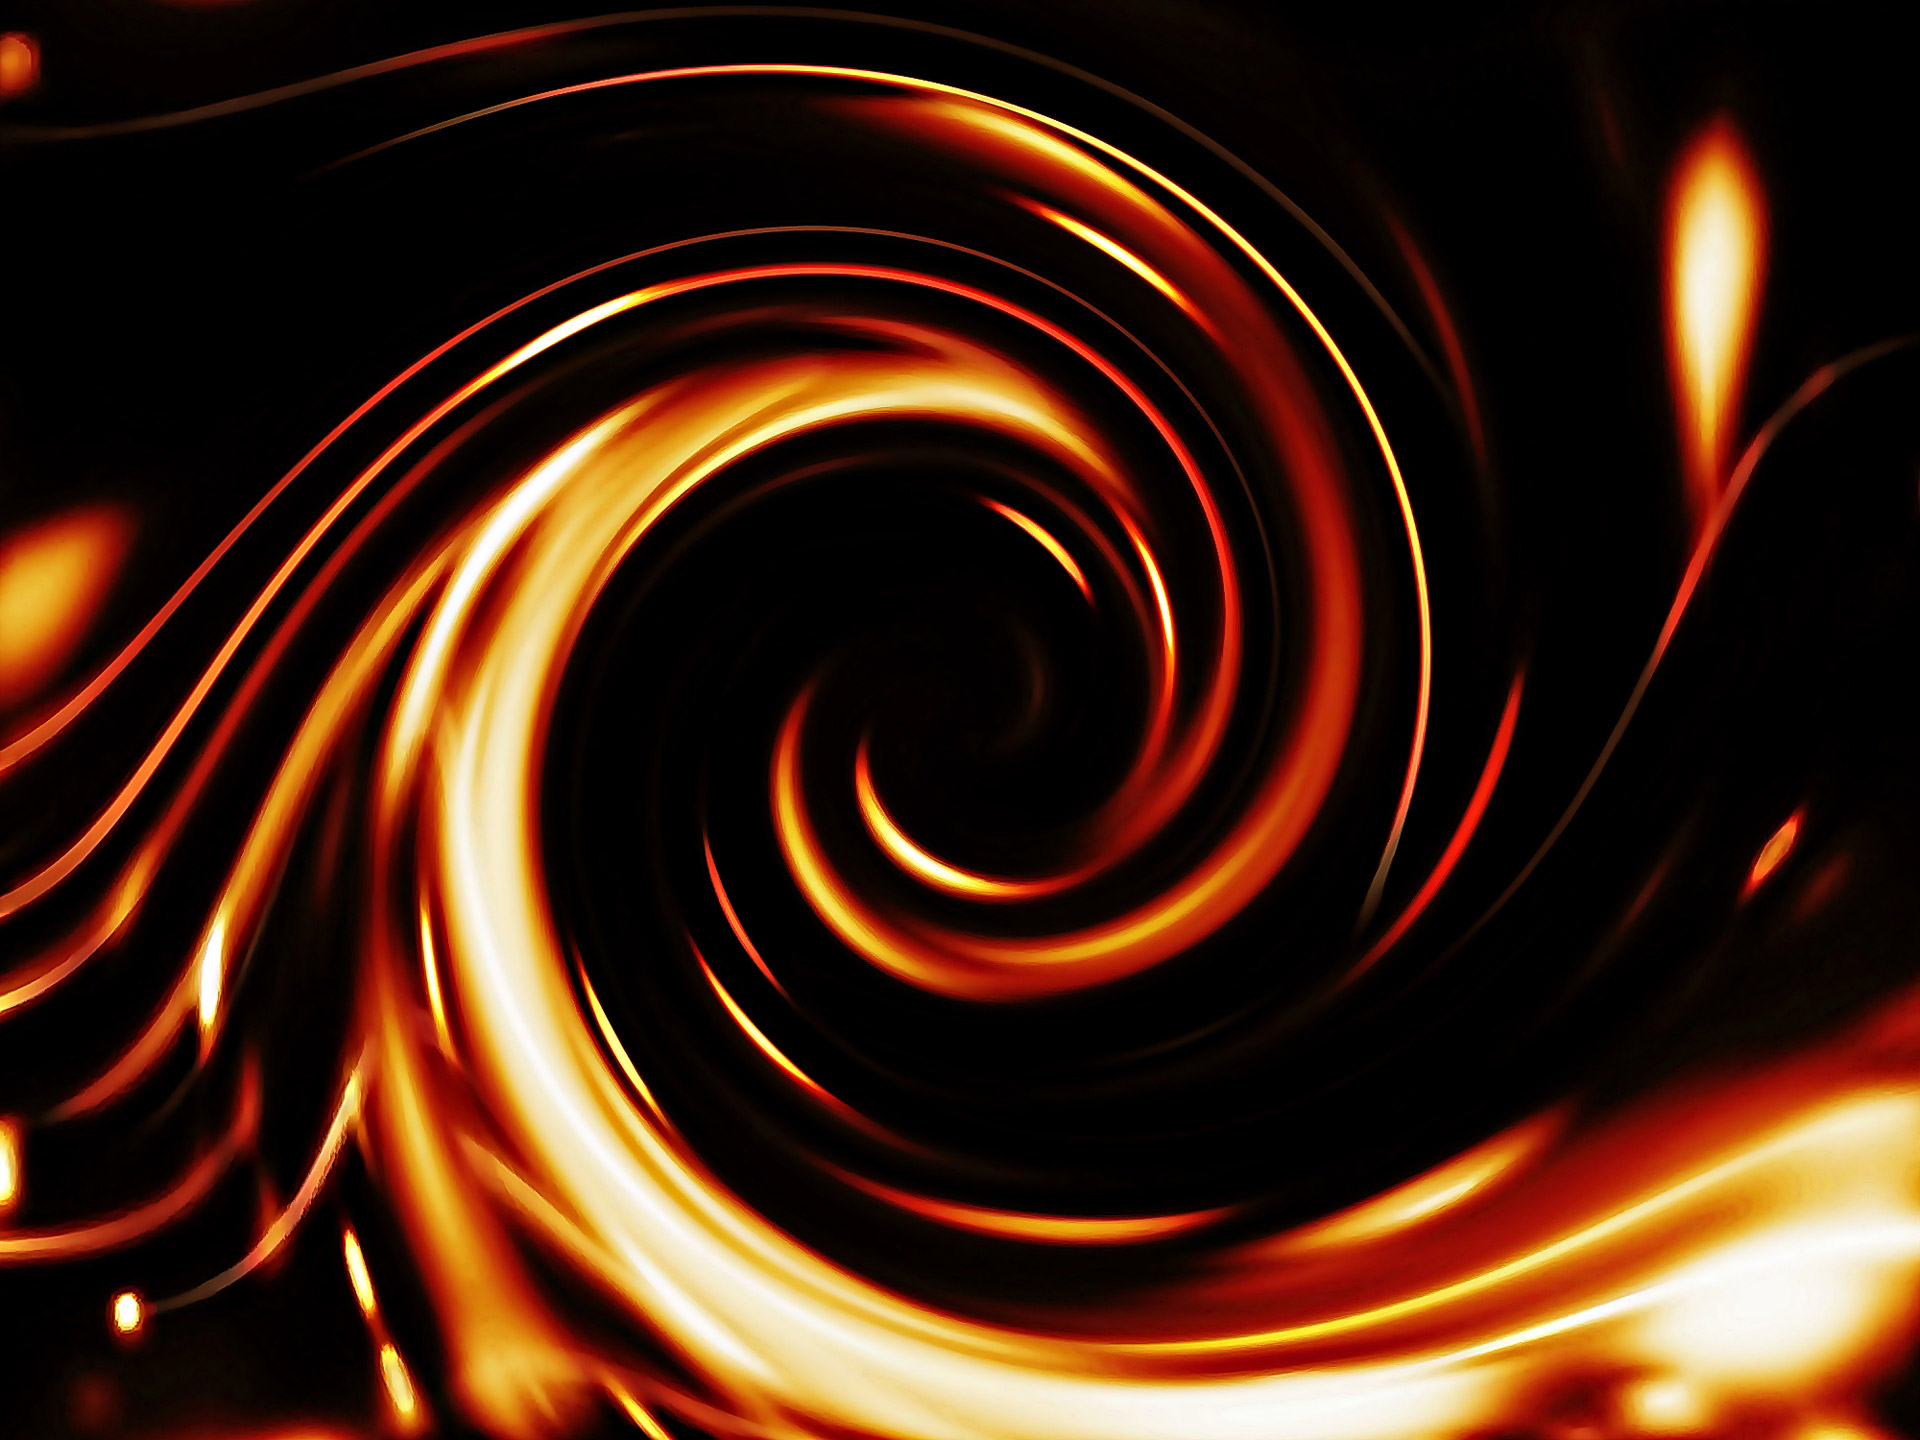 background sauermaul fire spiral out of focus free photo